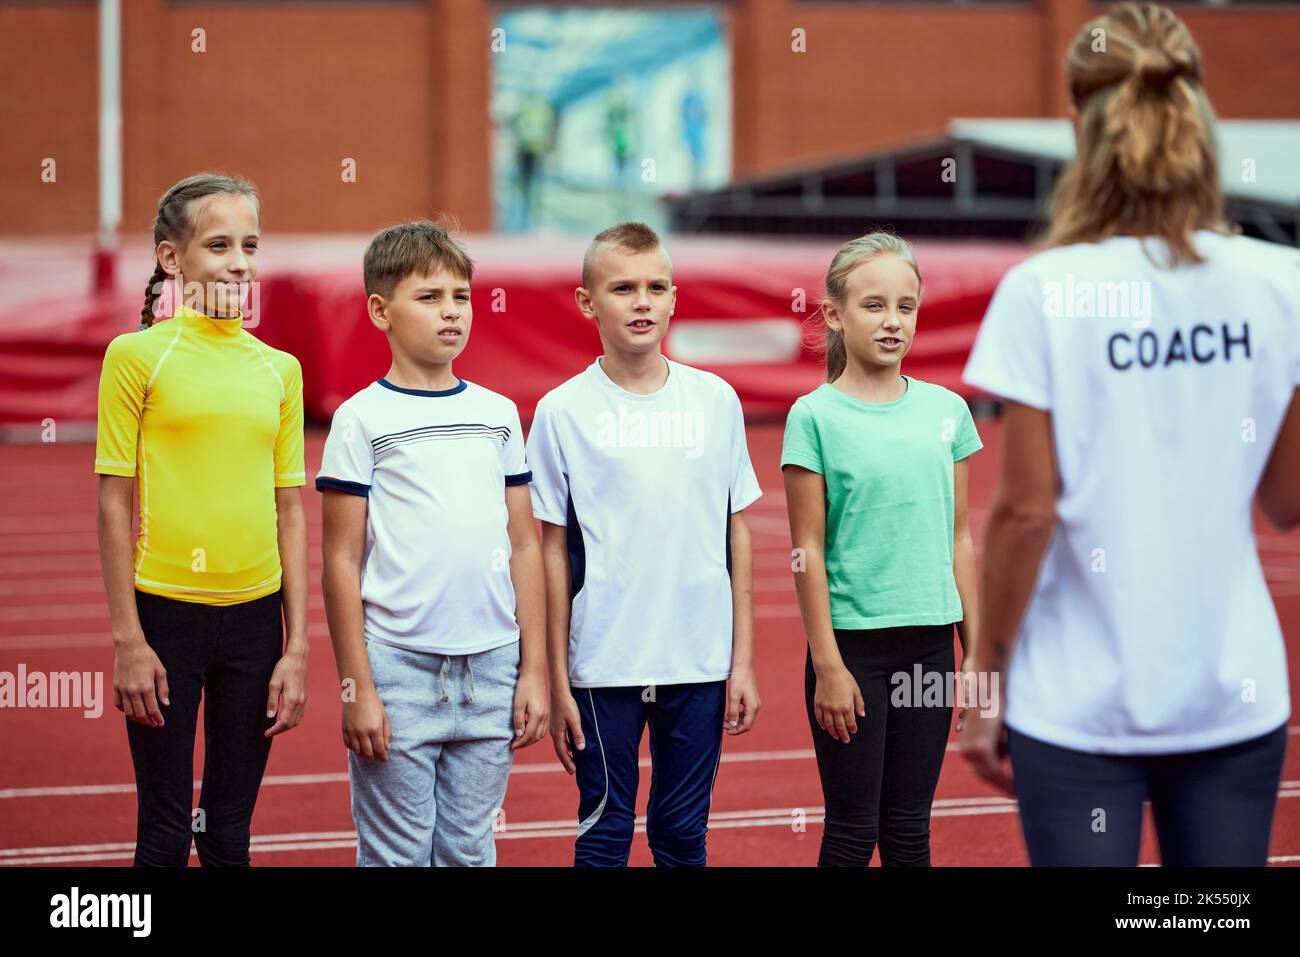 Female coach training athletes. Group of children before running on treadmill at the stadium. Concept of sport, achievements, studying, goals, skills Stock Photo